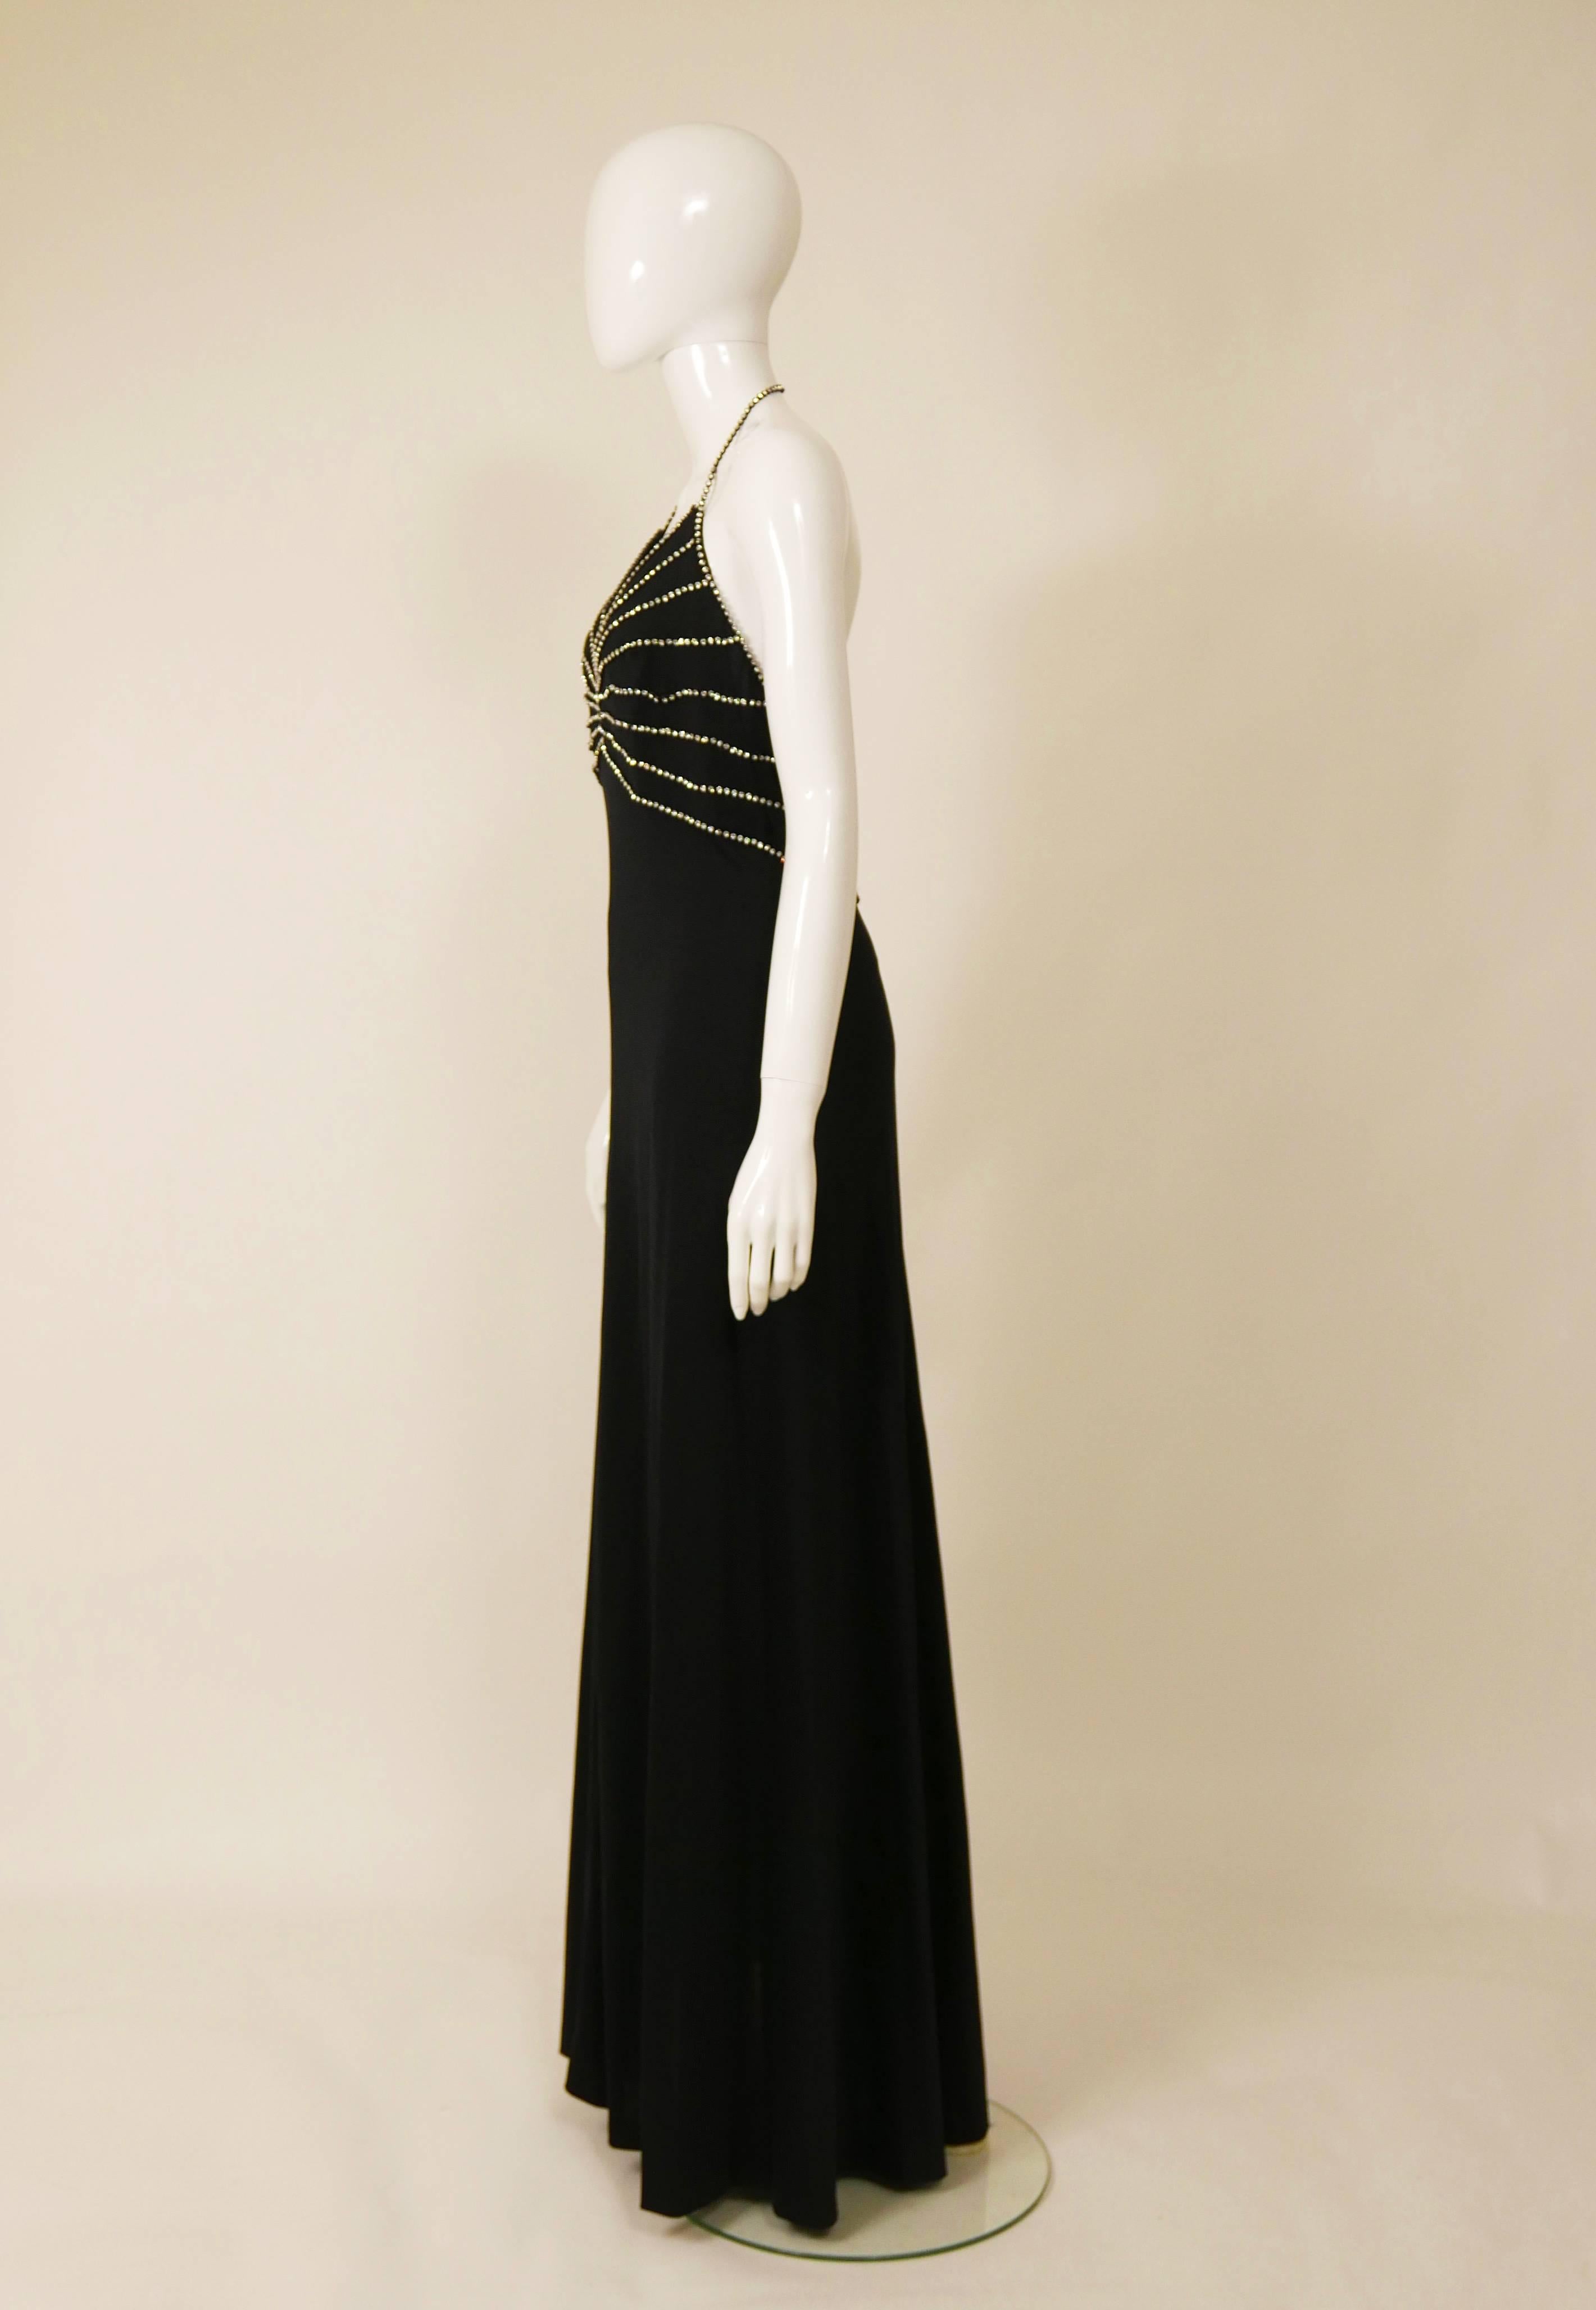 This lovely 1970s Azzaro halter top long dress is in black jersey fabric with rhinestones details. It has spaghetti straps and soft line with back zip closure. 

Very good vintage condition

Label: Loris Azzaro Paris Made in France
Fabric: